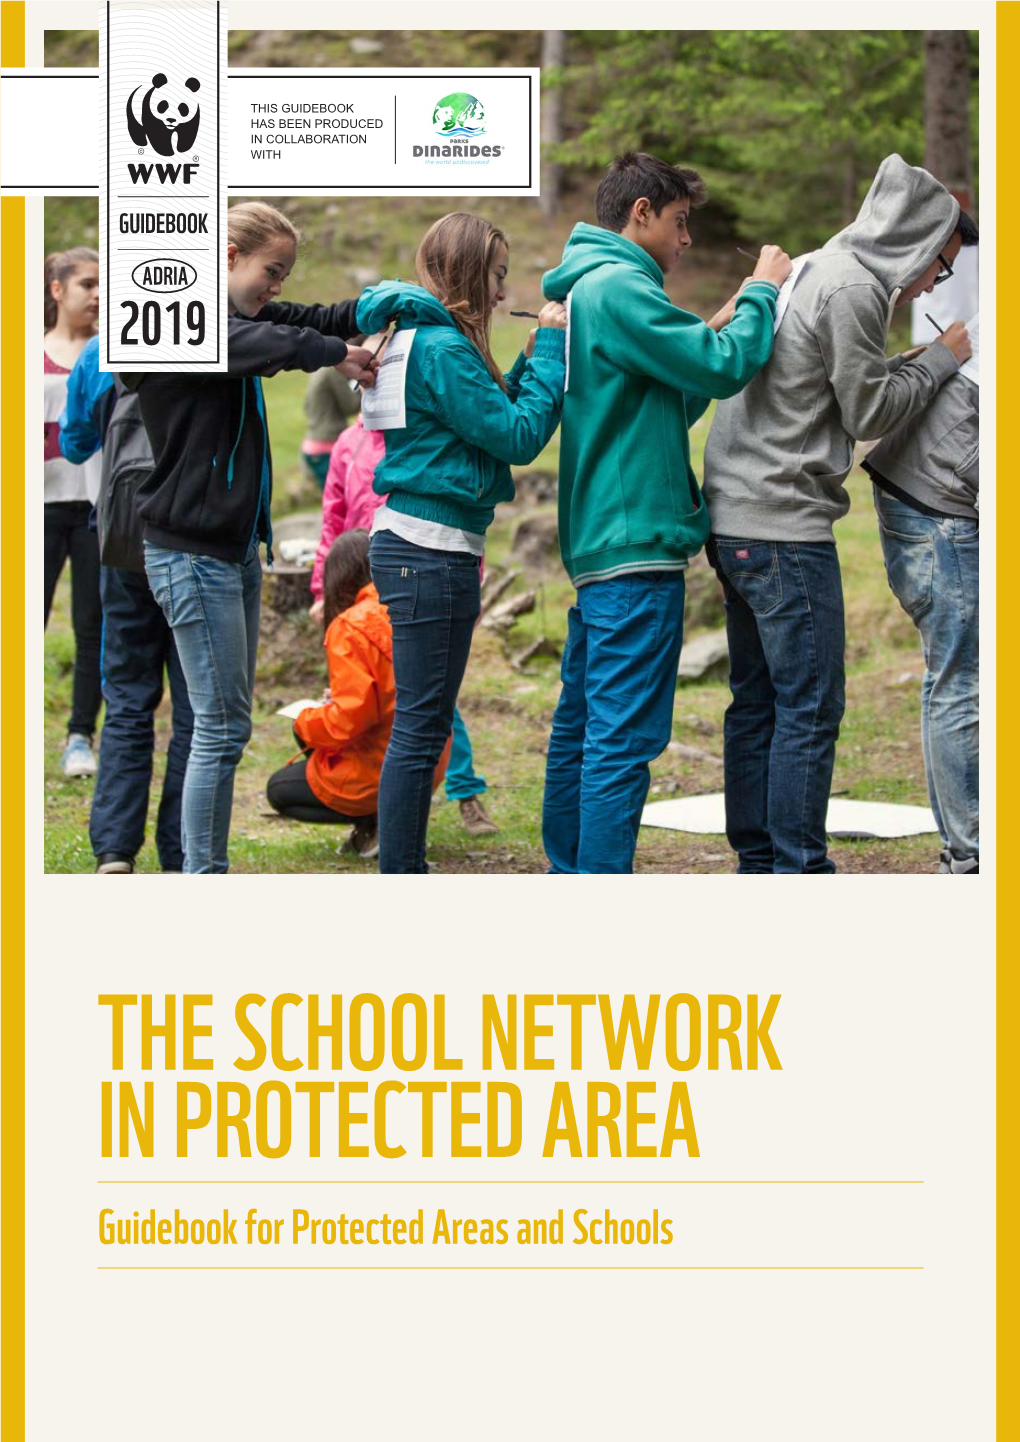 The School Network in Protected Area